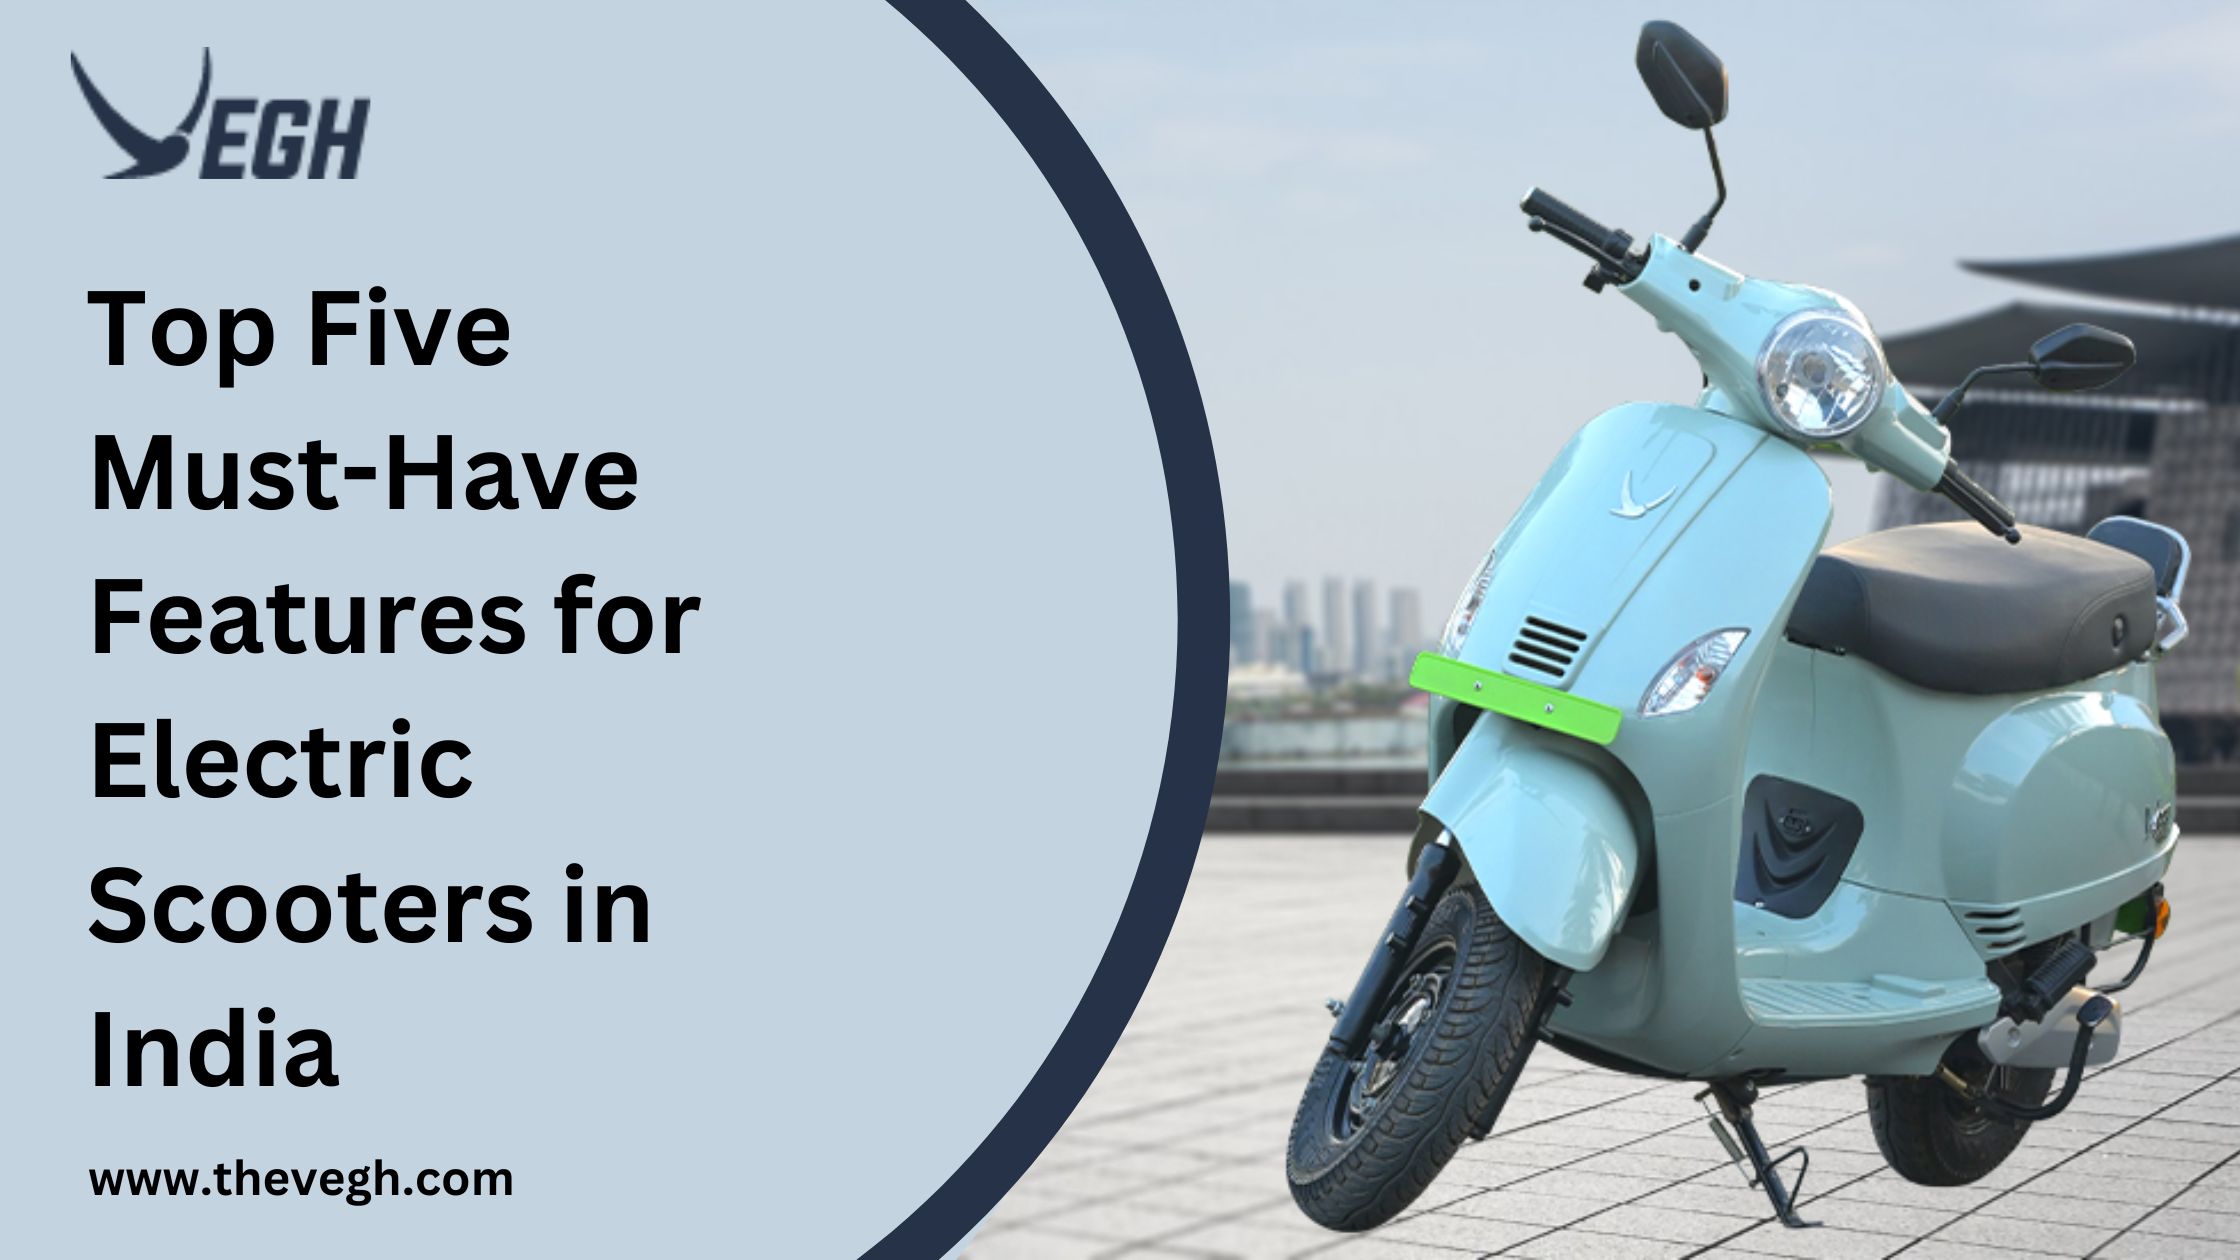 Top five must-have features for electric scooters in India